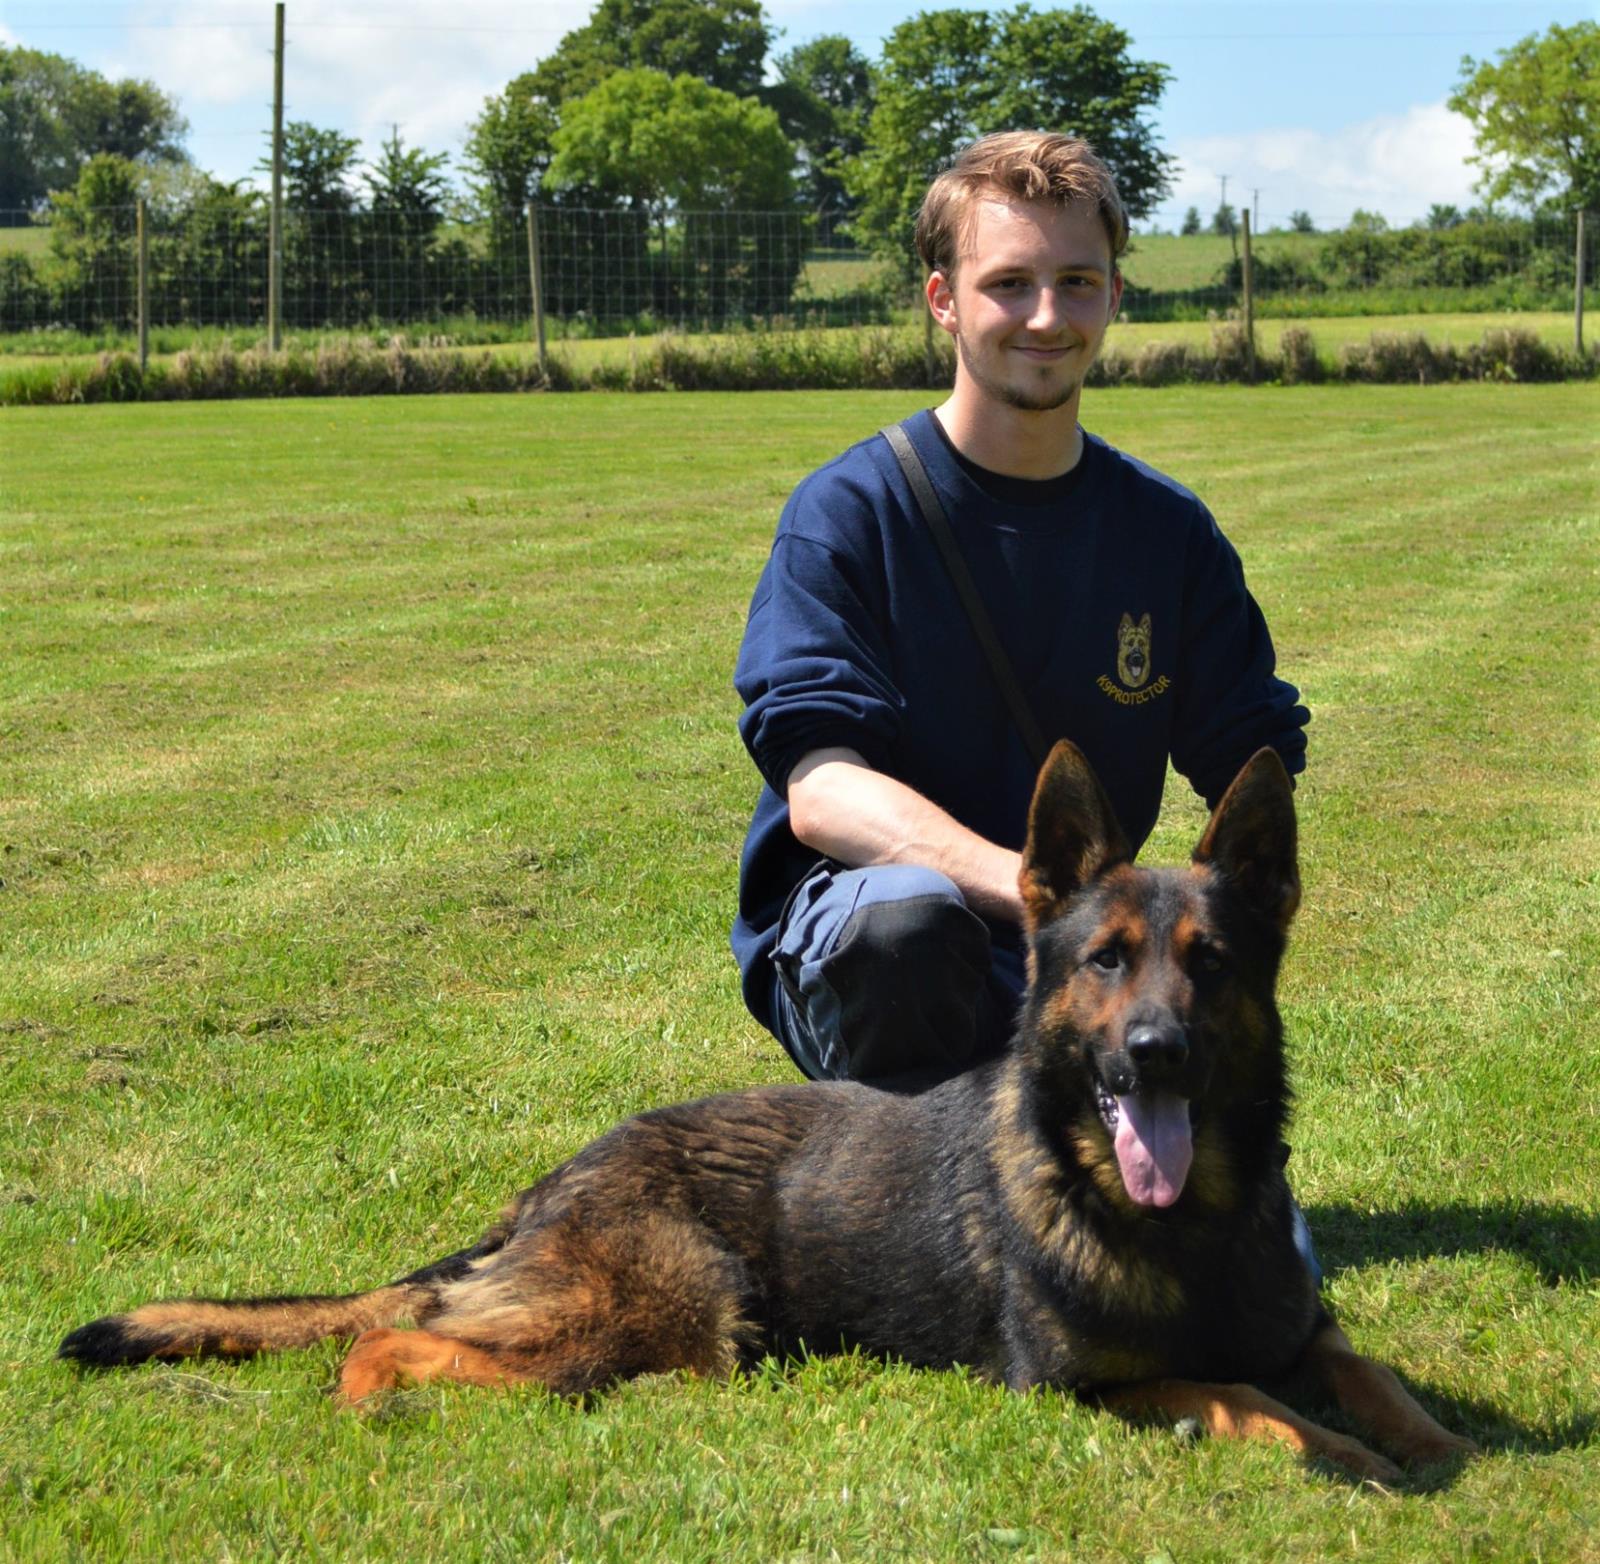 Protection dog trainer Kieran French